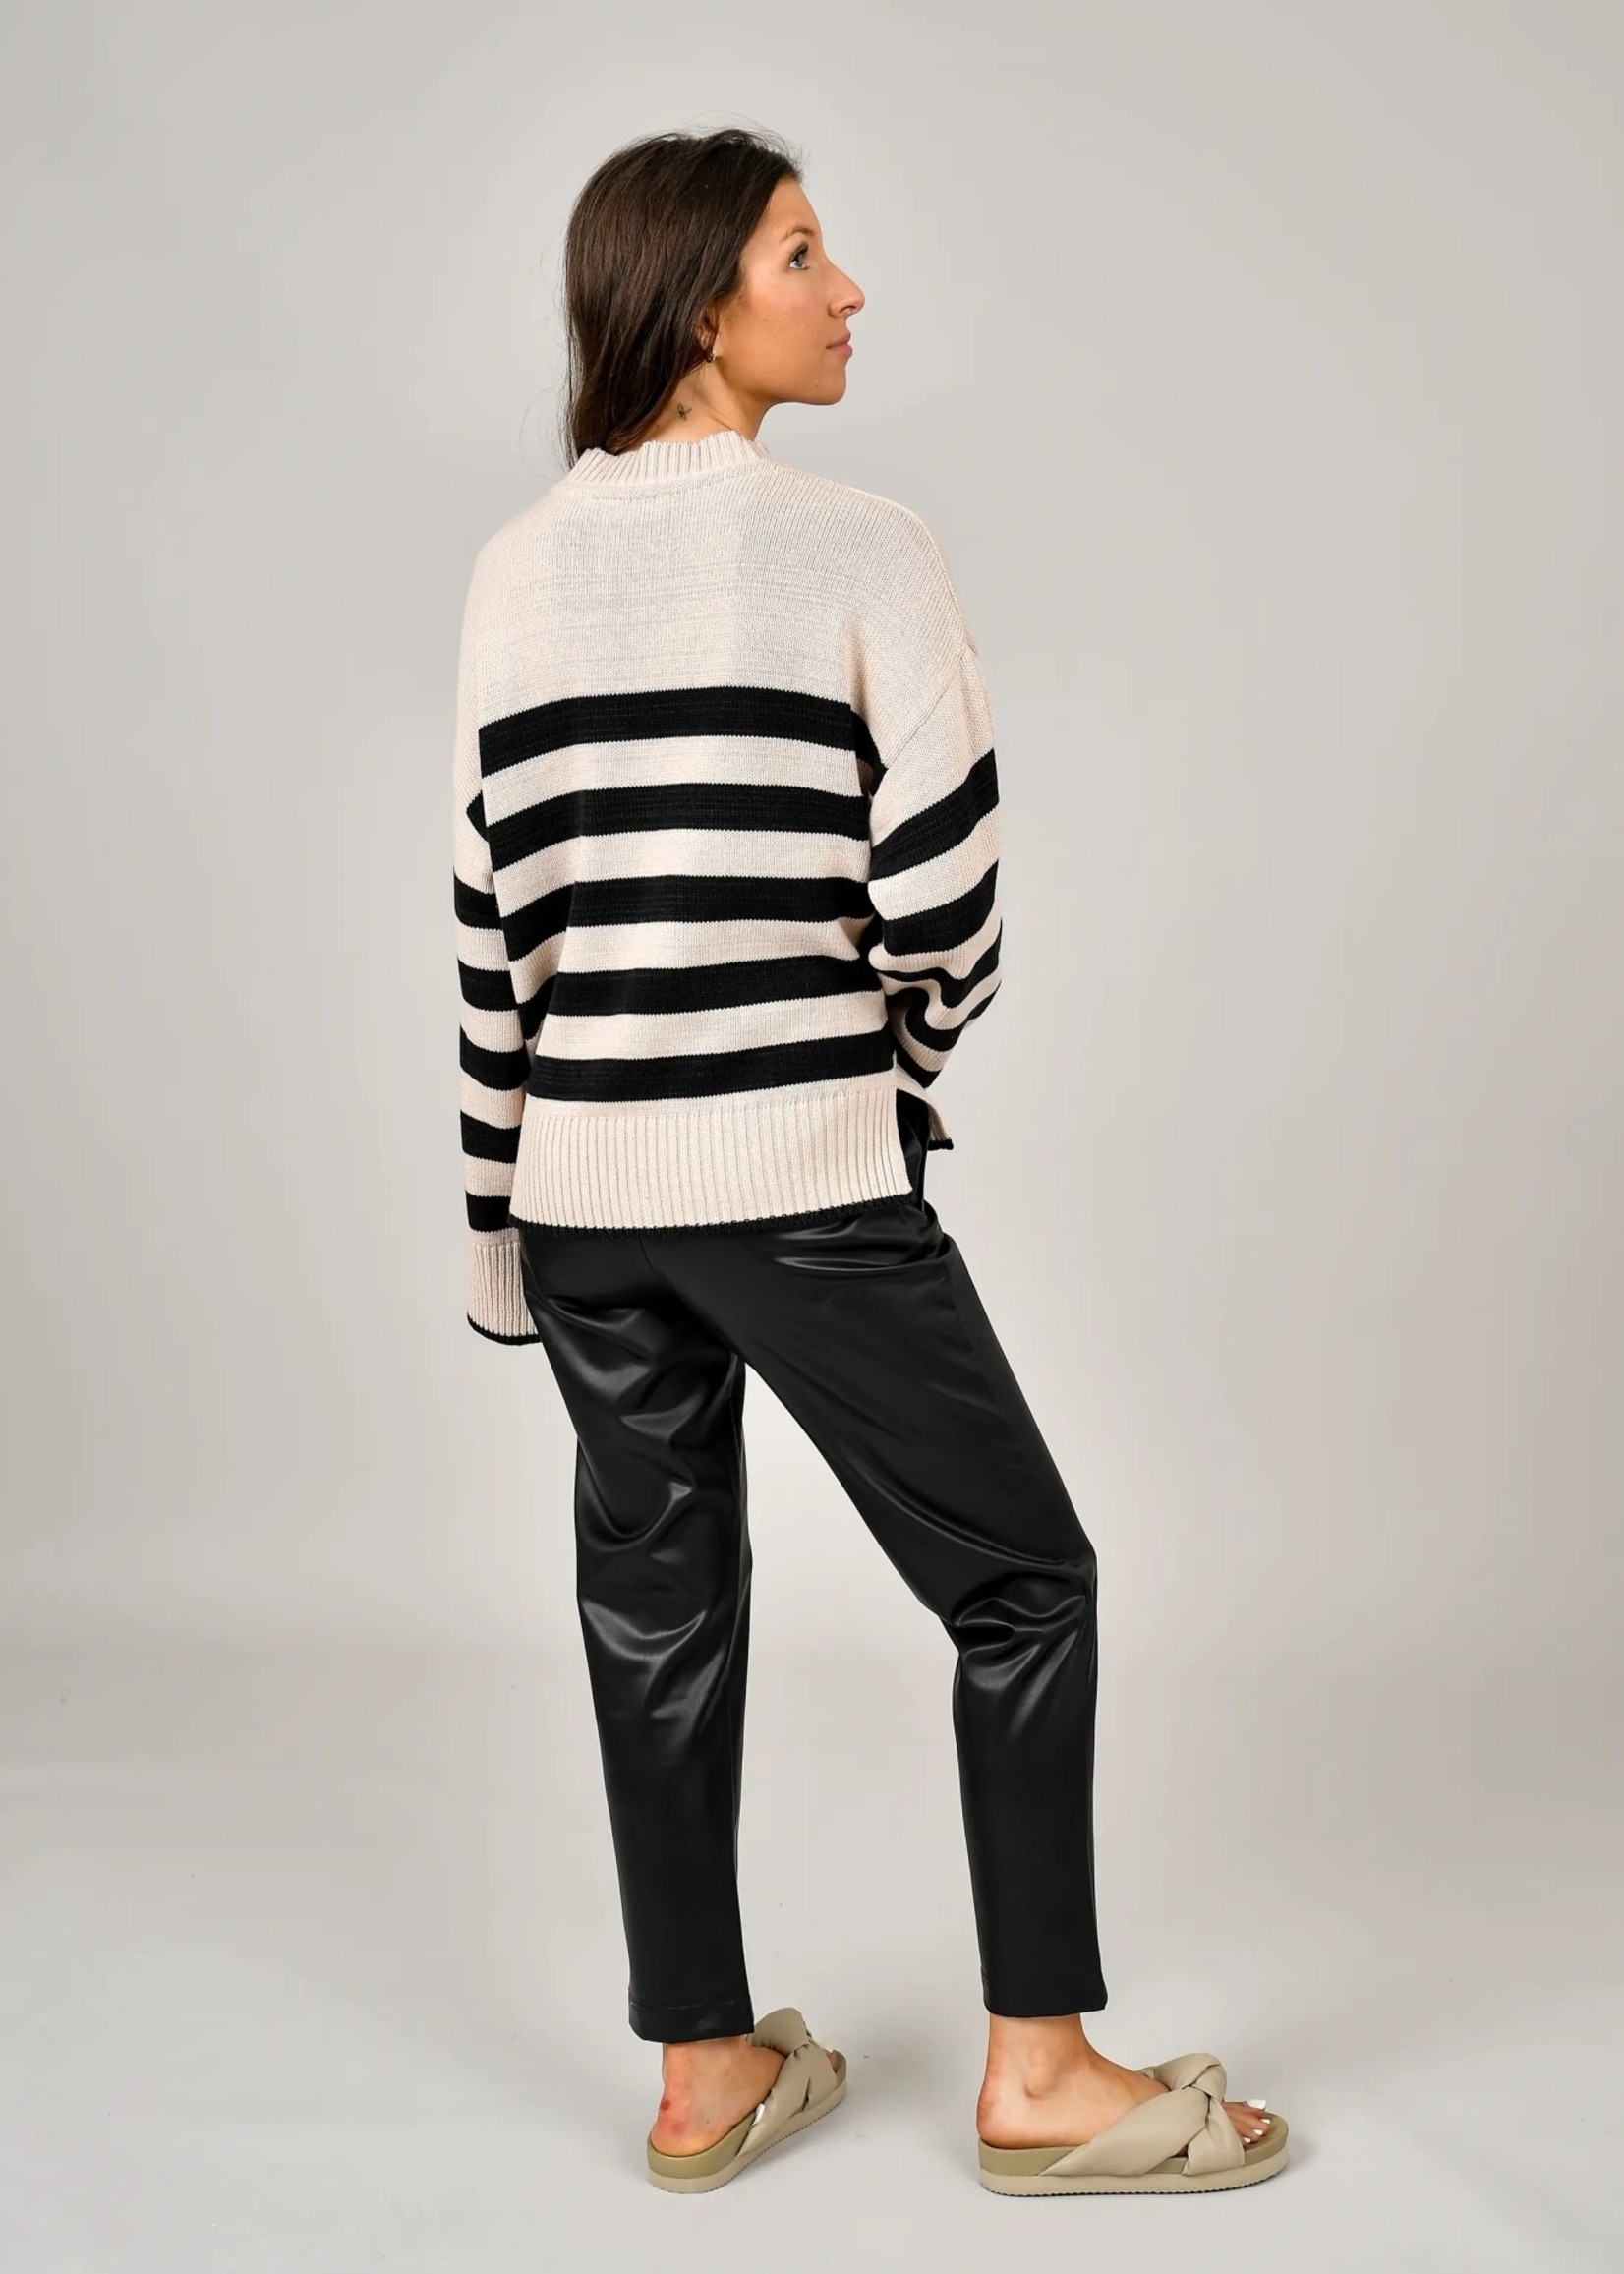 RD STYLE Magda Long Sleeve Crew Neck